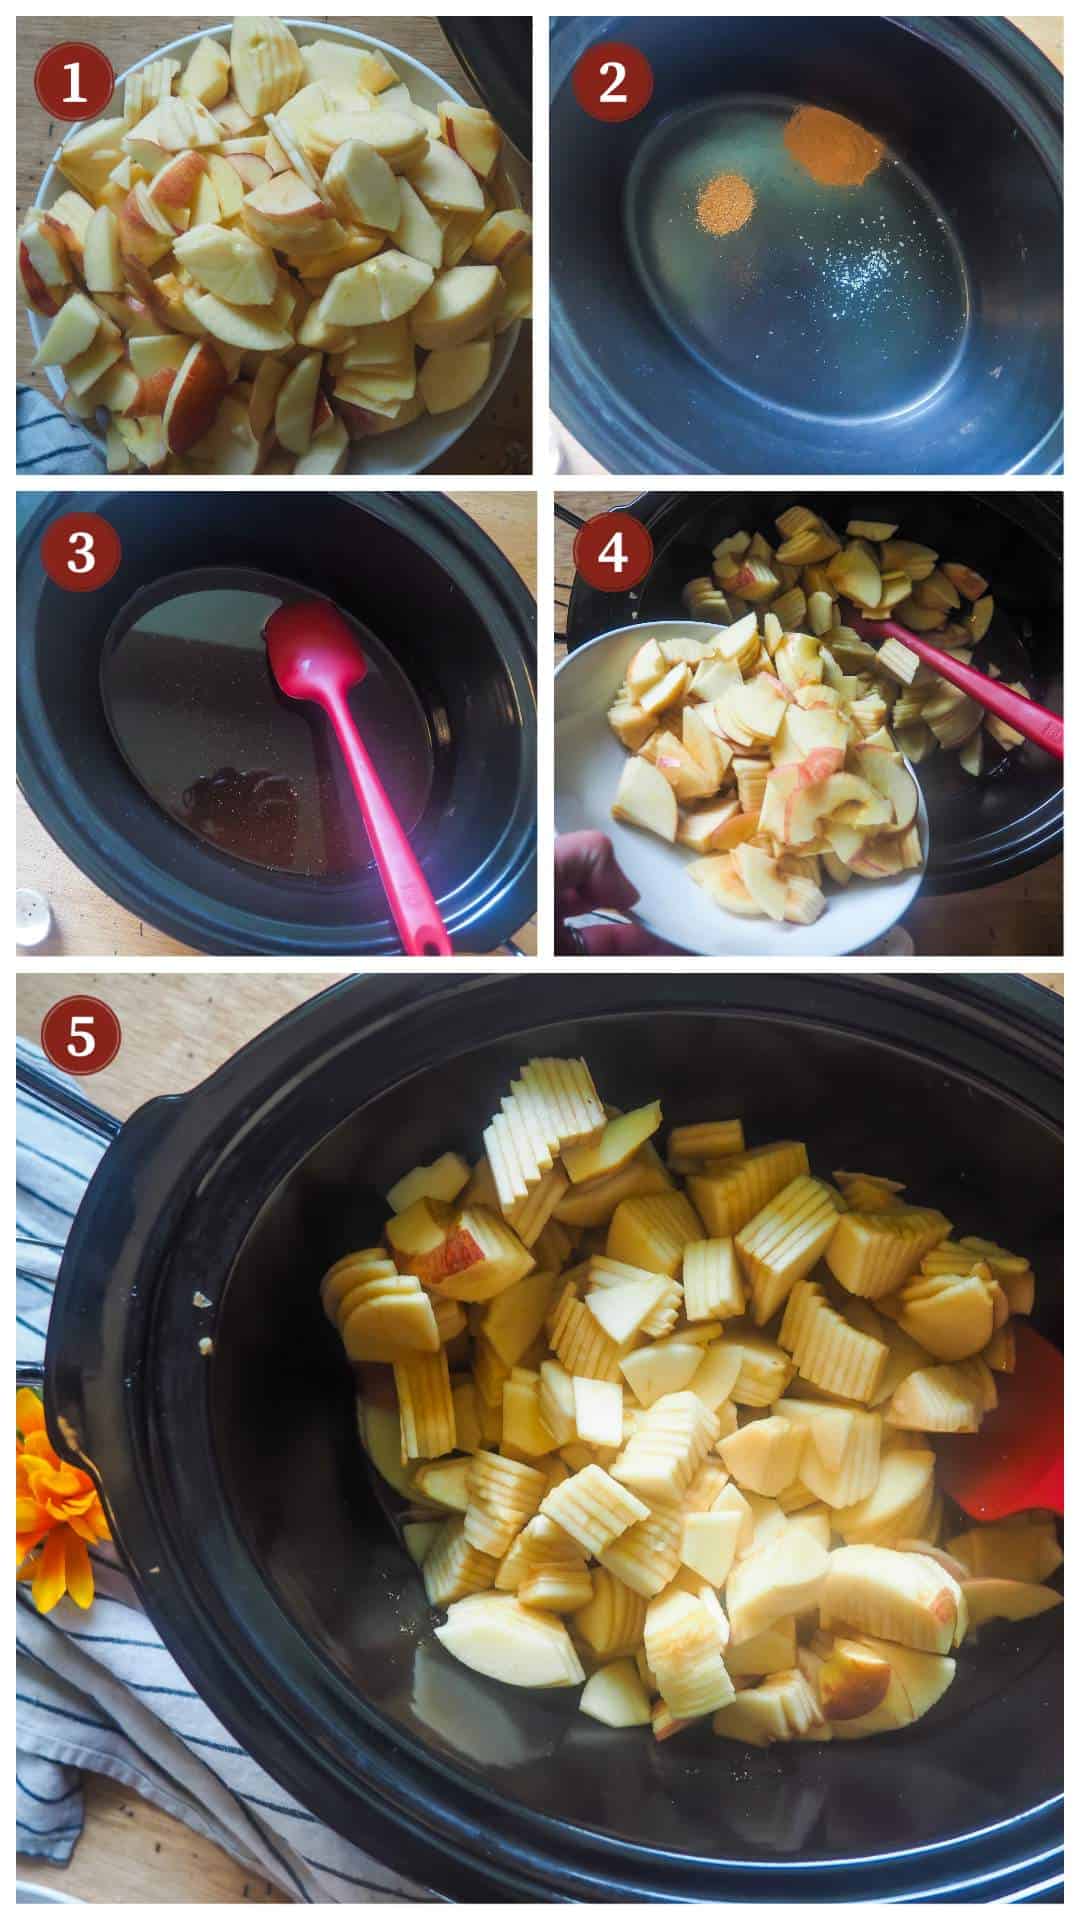 a collage of images showing how to make apple butter, steps 1 - 5.